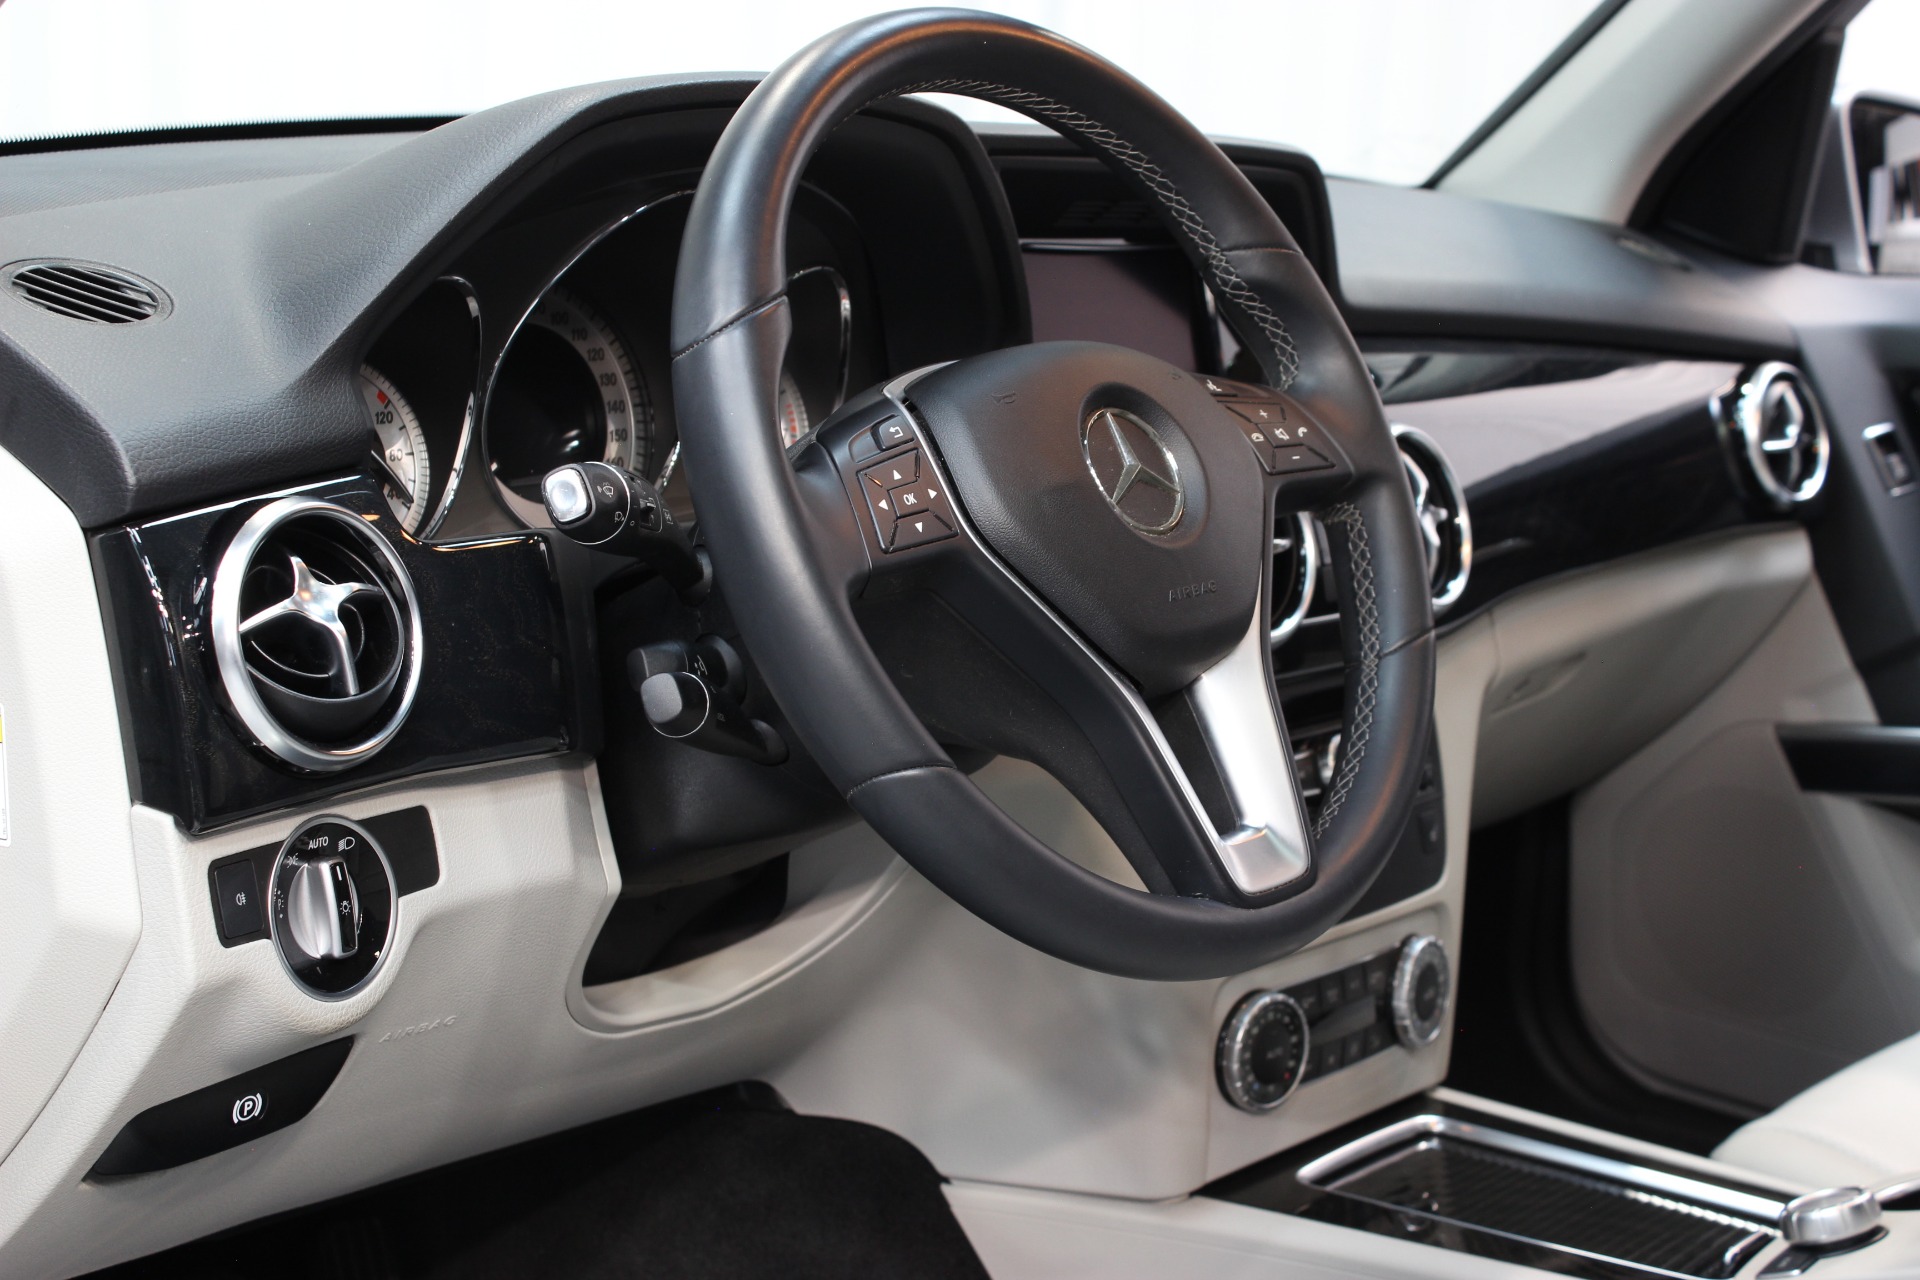 Price Of 2014 Mercedes-Benz Glk 350 In Nigeria, Spec And Reviews